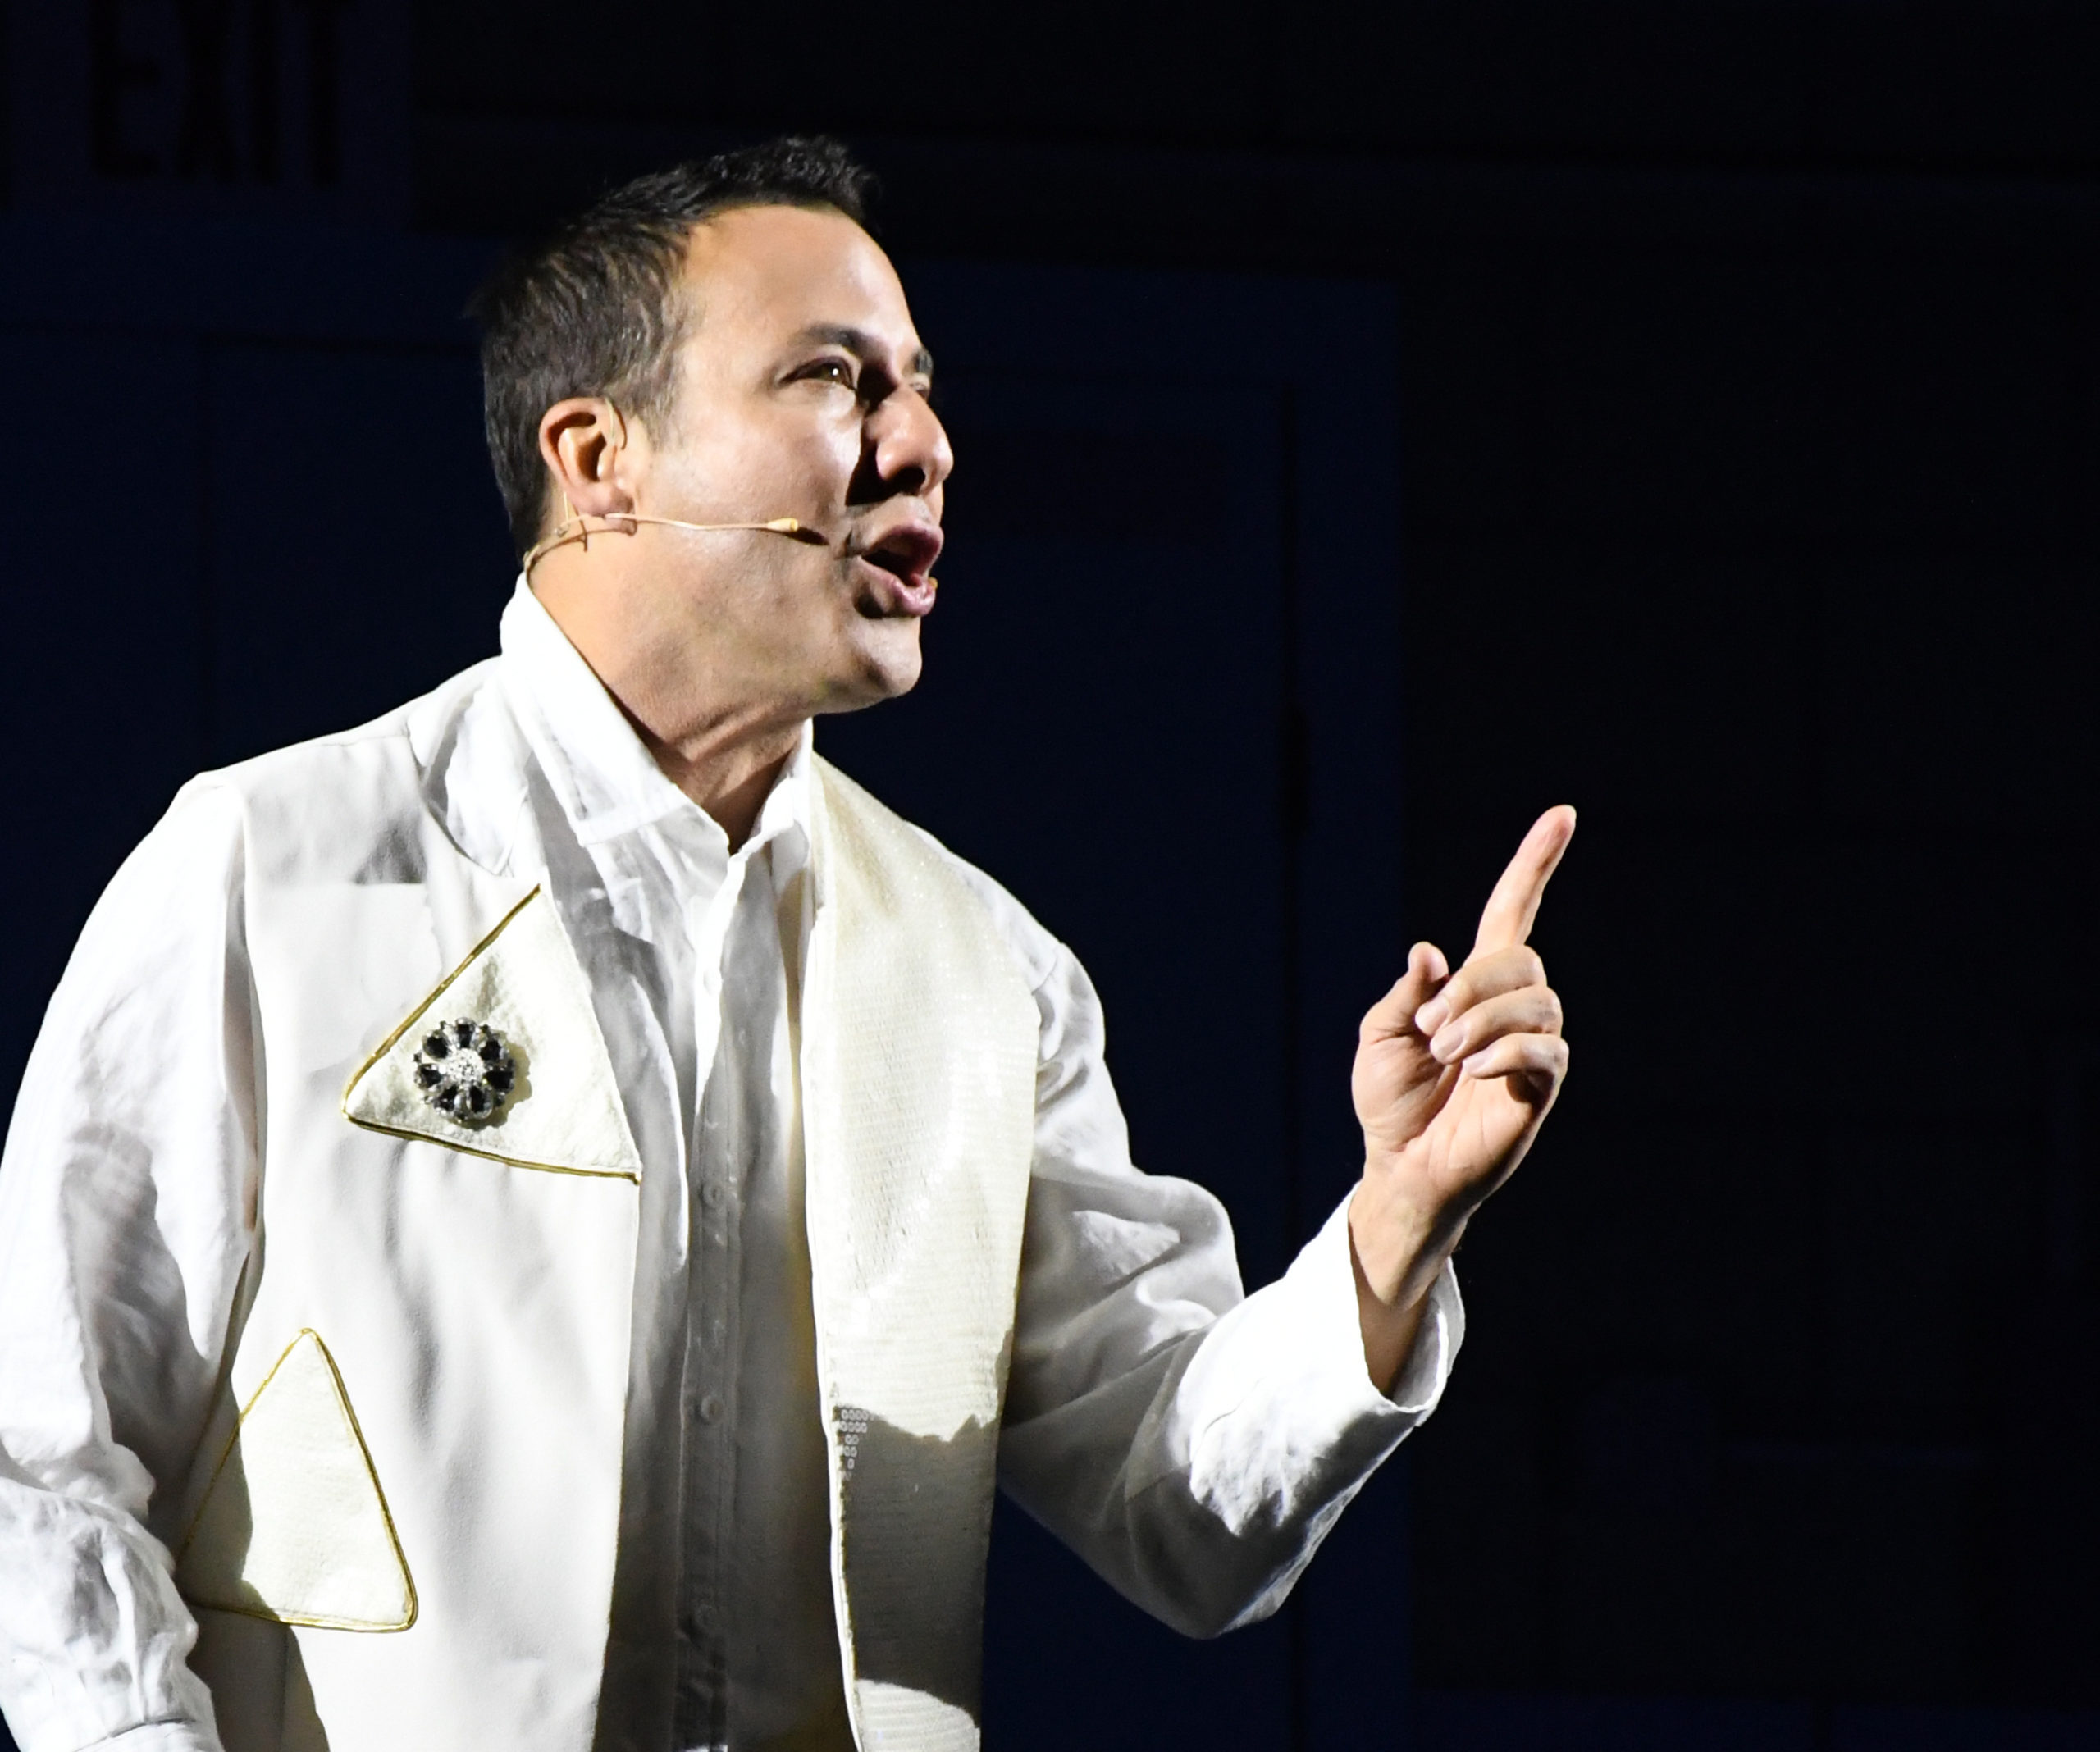 BWW Previews: HOWIE D: BACK IN THE DAY at The Rose Theater